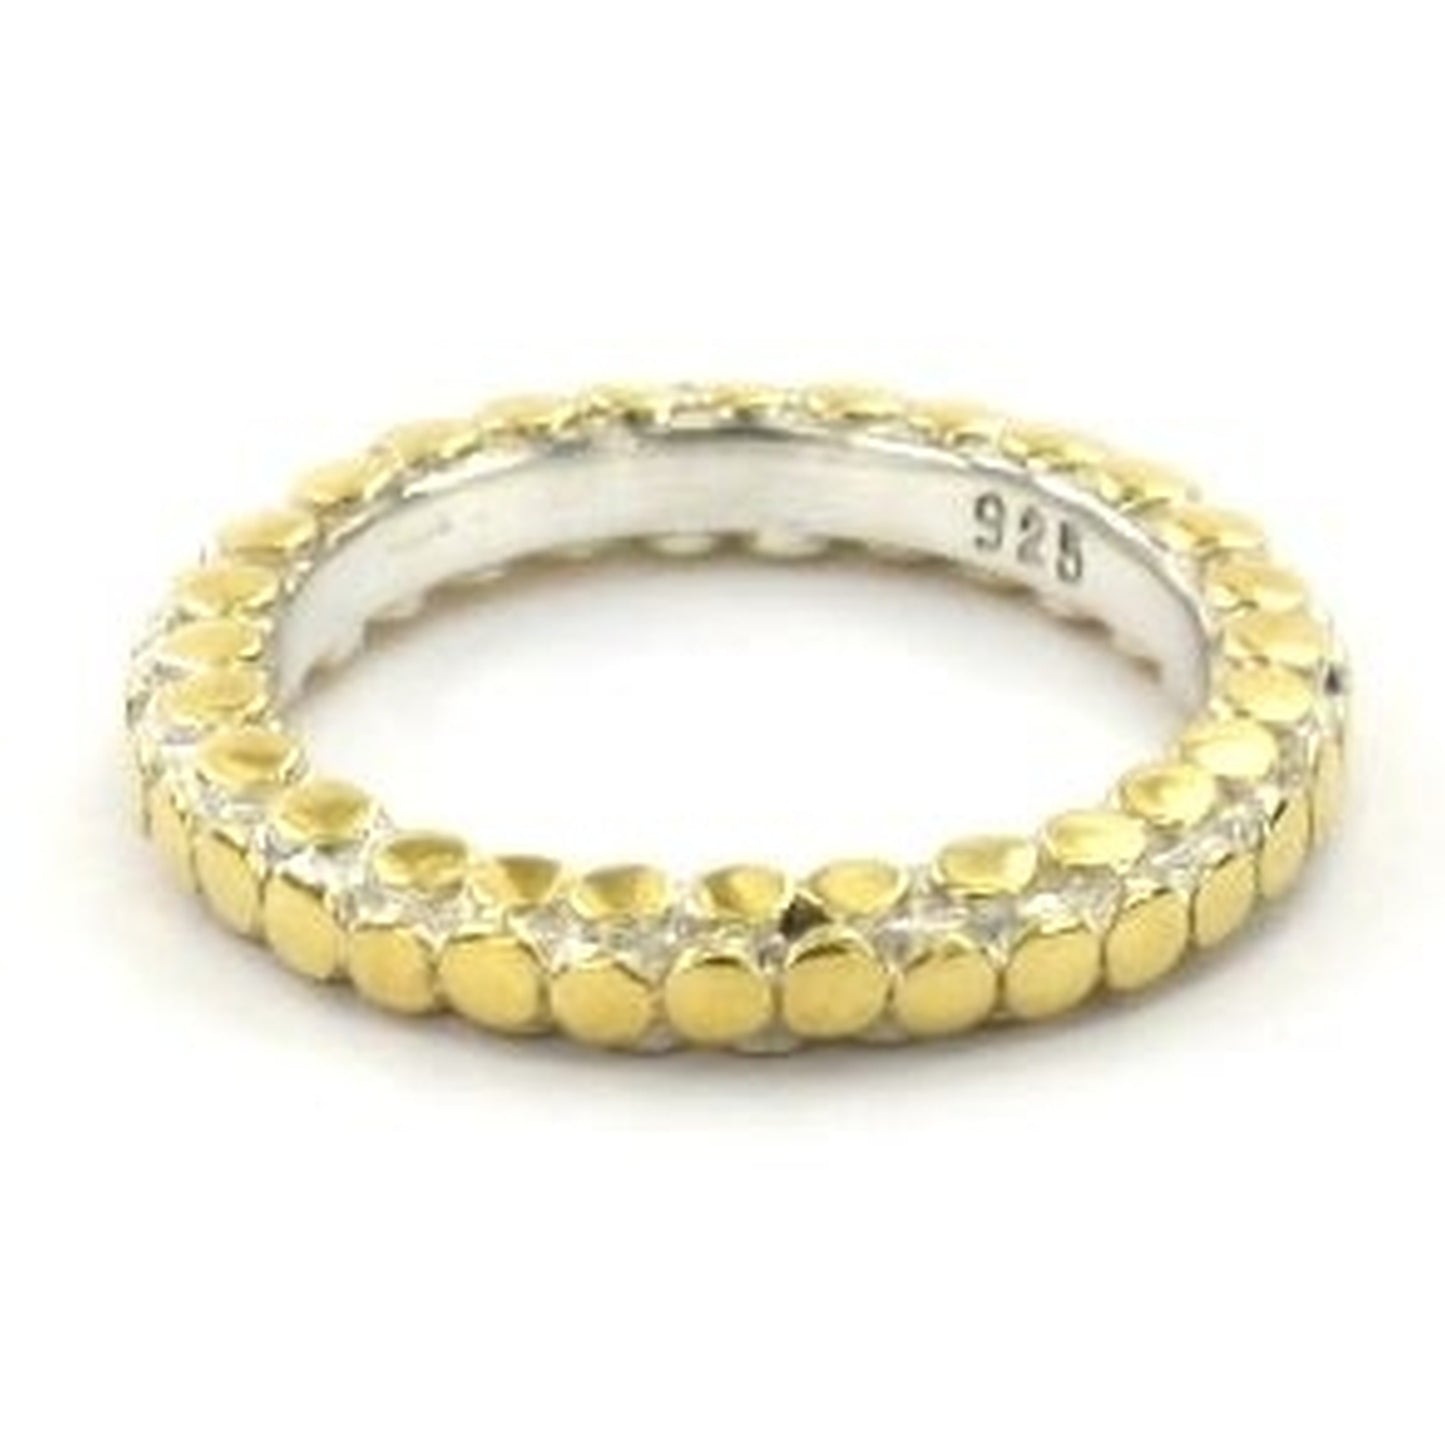 Silver and gold ring with flat dot adornment.